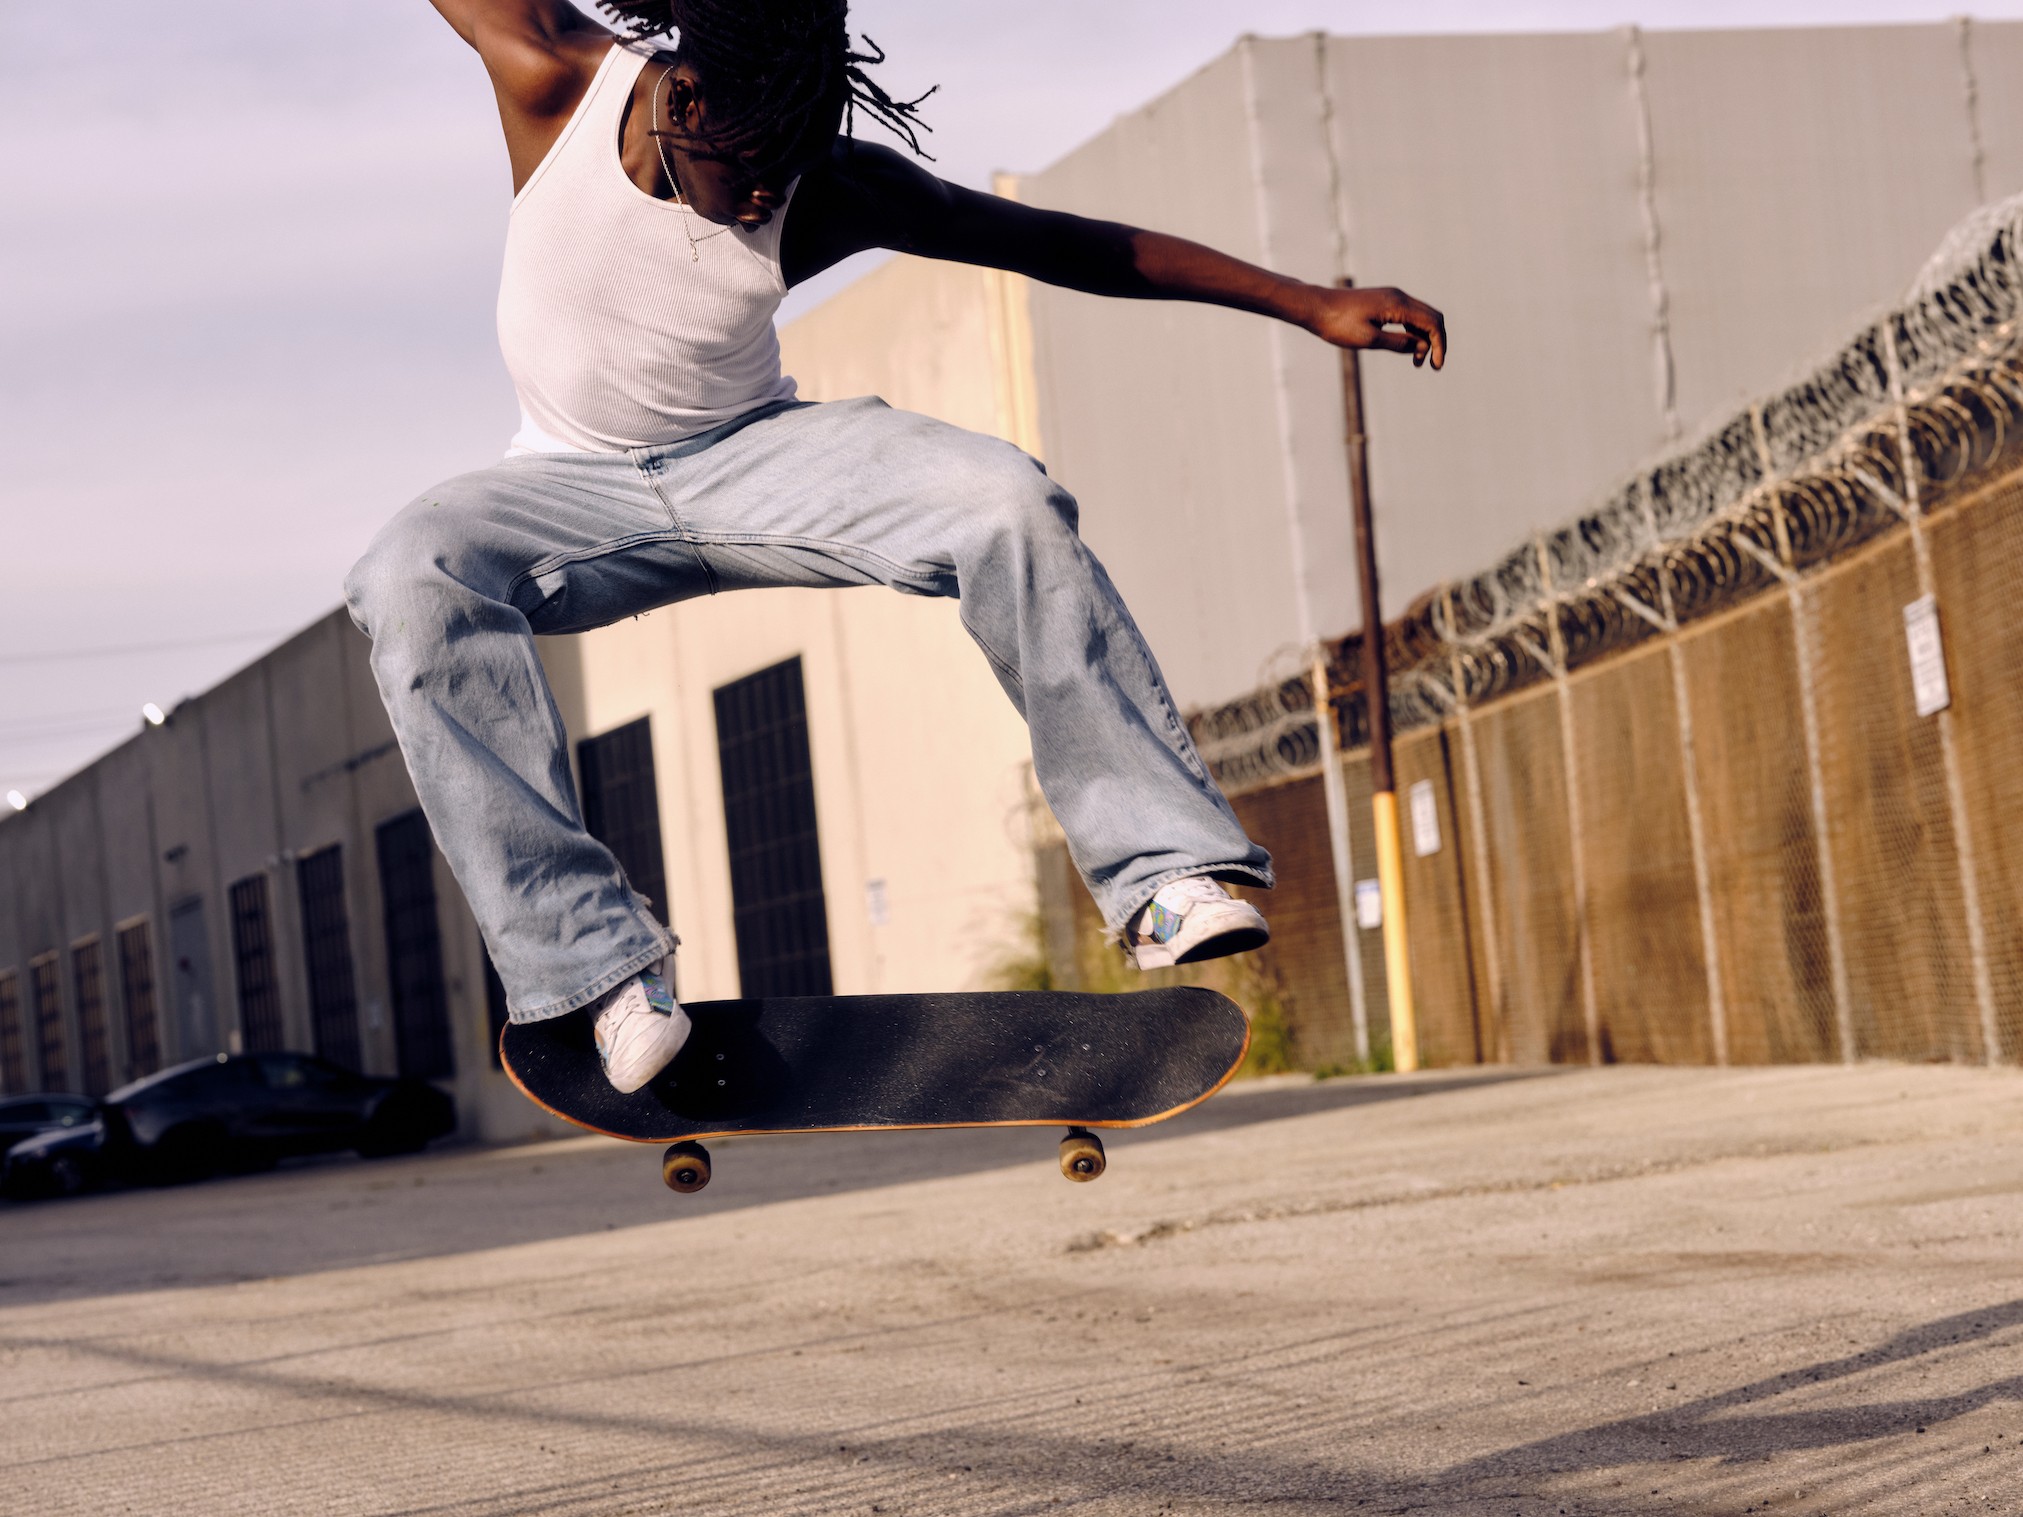 photo of an african-american man in baggy light blue unspun jeans performing a skateboard trick